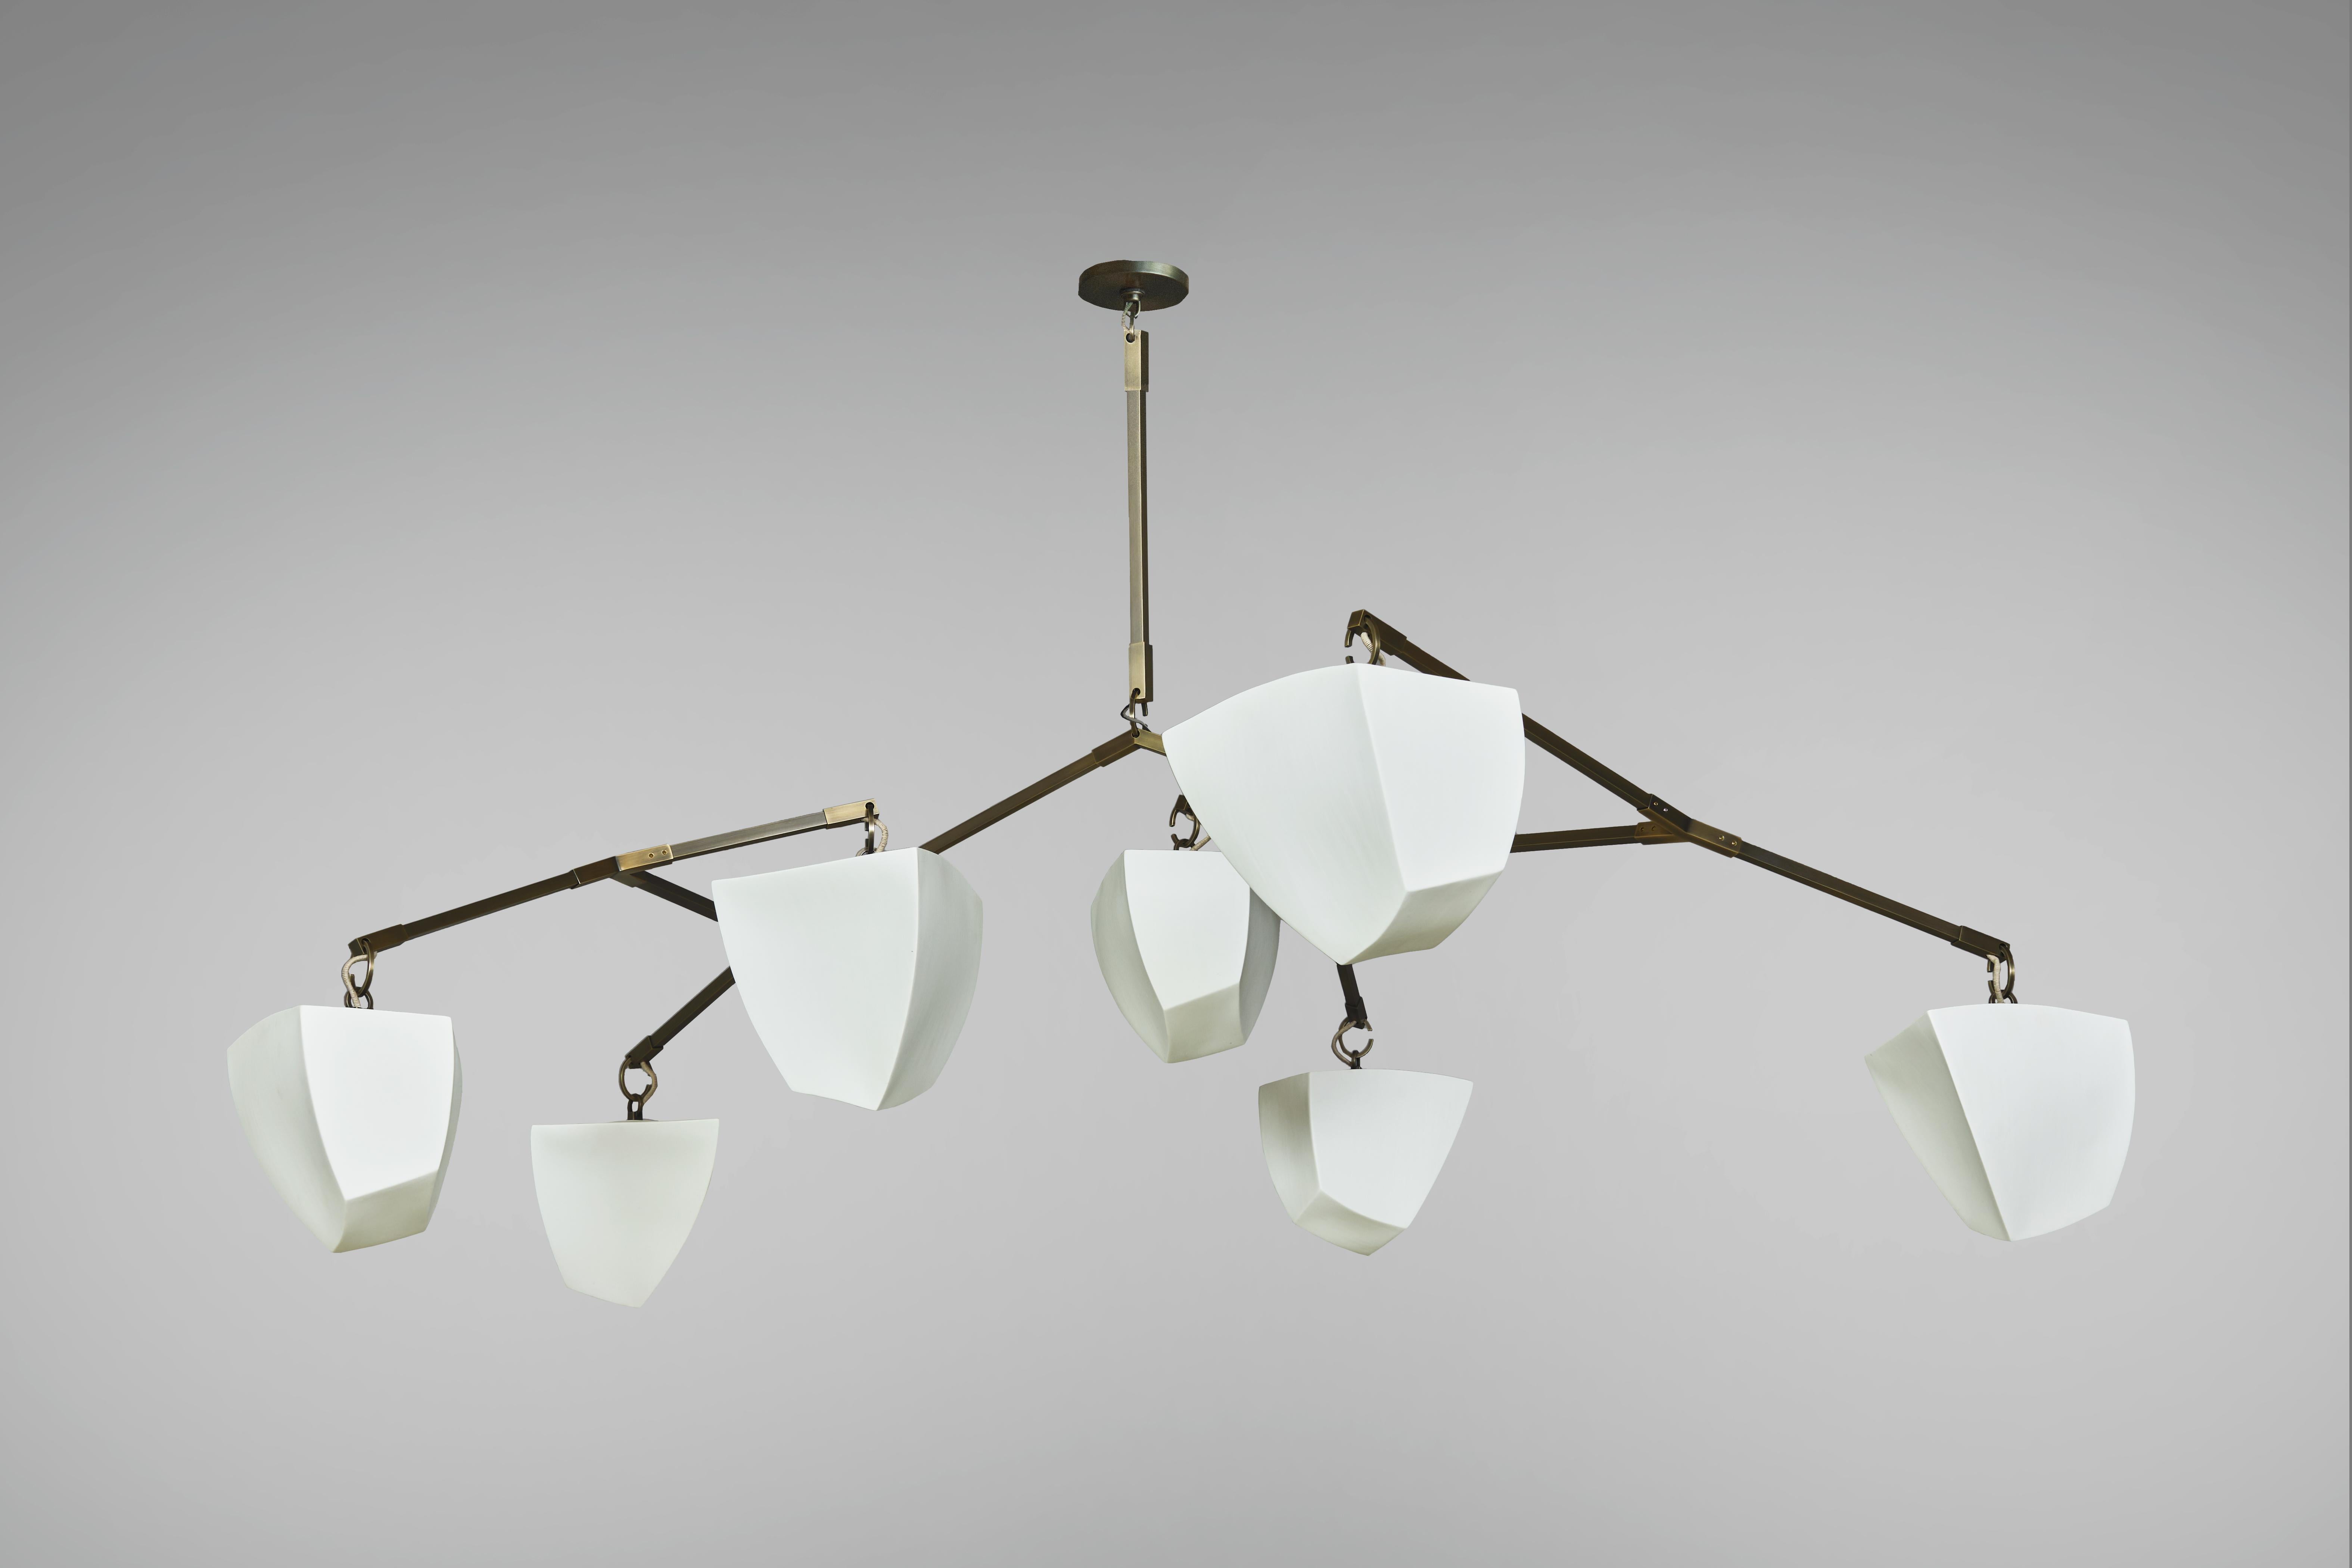 This is a horizontal mobile chandelier with 7 glowing cast porcelain polyhedrons.

The Cassiopeia series was designed for spaces with lower ceiling heights where a horizontal chandelier is needed.

Our unique mobile chandelier system can be